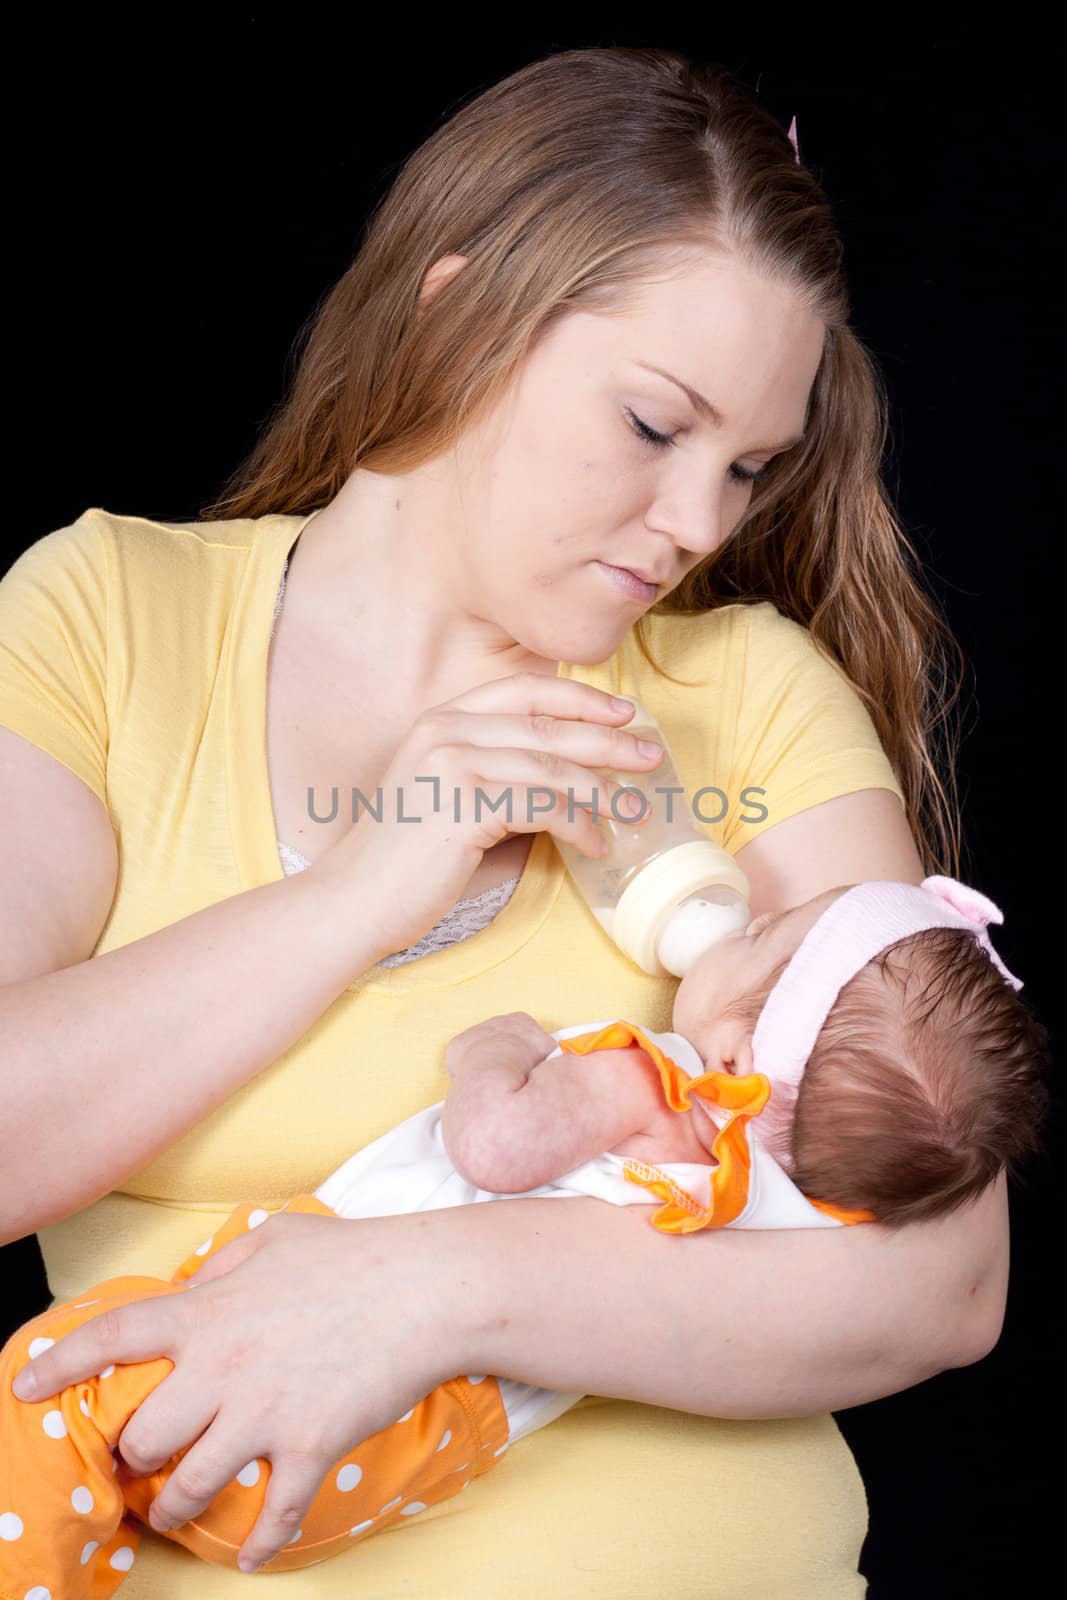 A mother feeding her baby out of a bottle.